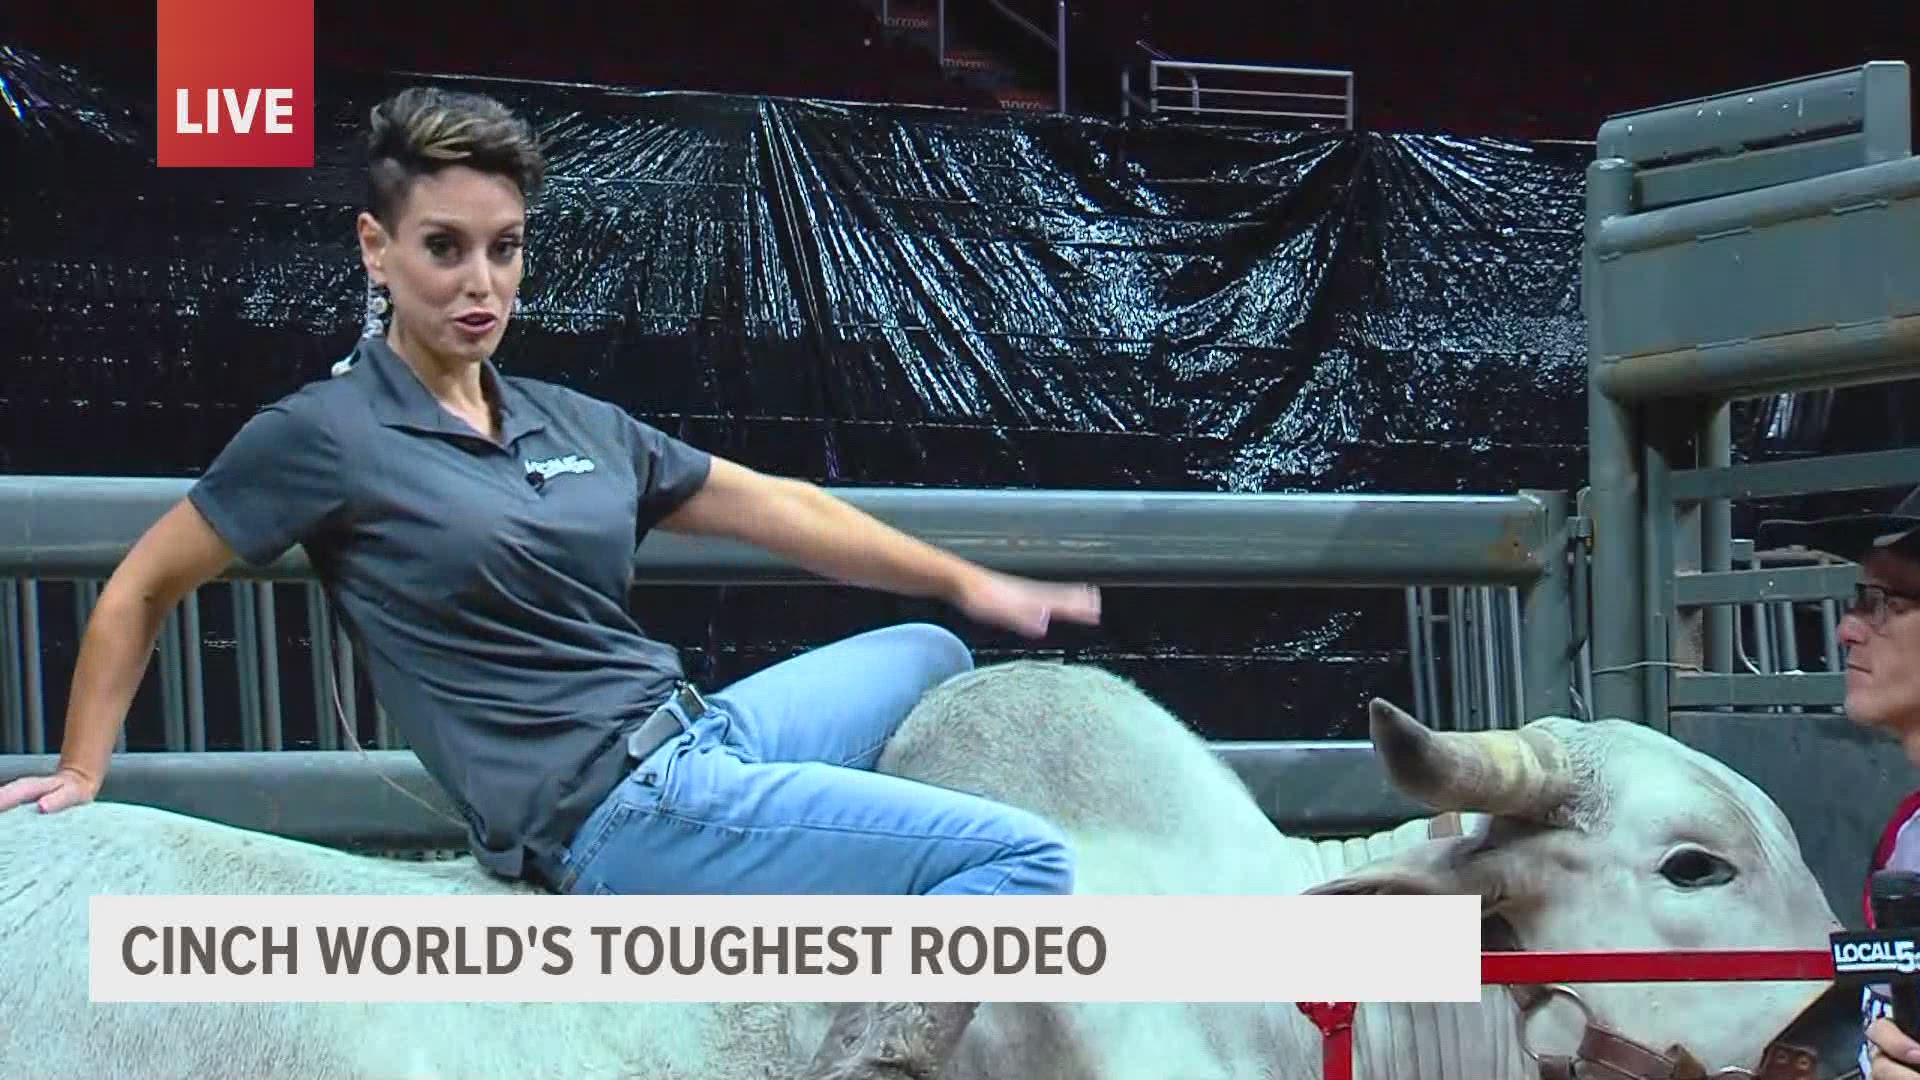 Cinch World's Toughest Rodeo is back at Wells Fargo Arena with two shows on Saturday